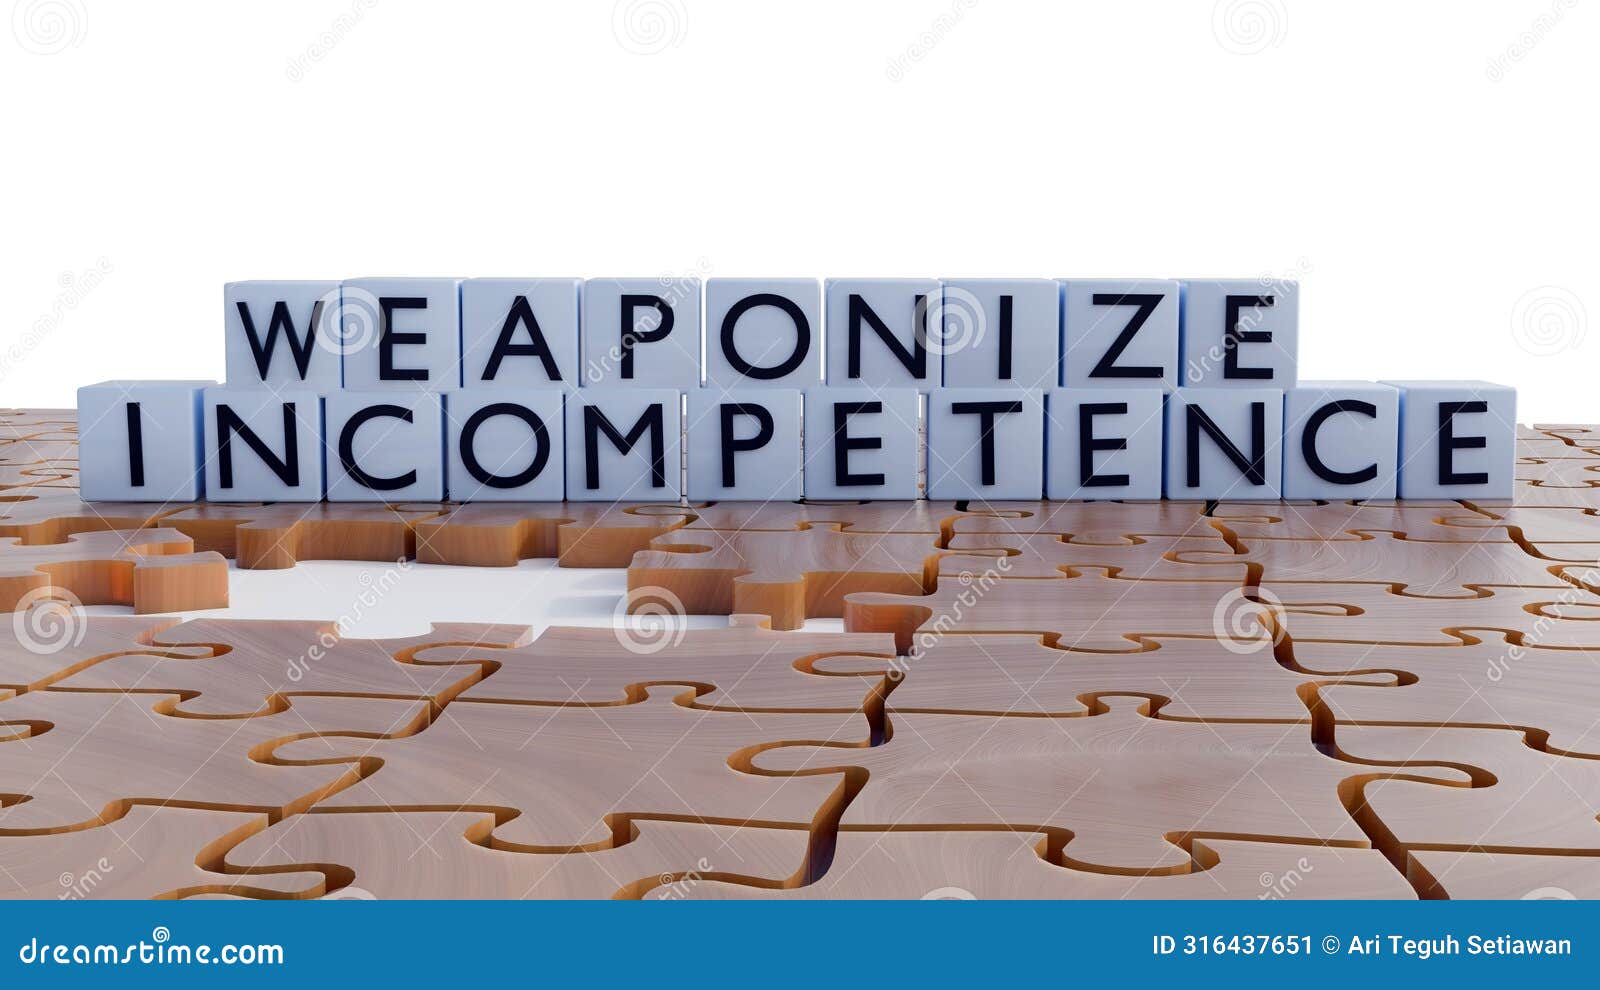 weaponized incompetence with uncomplete jigsaw pieces